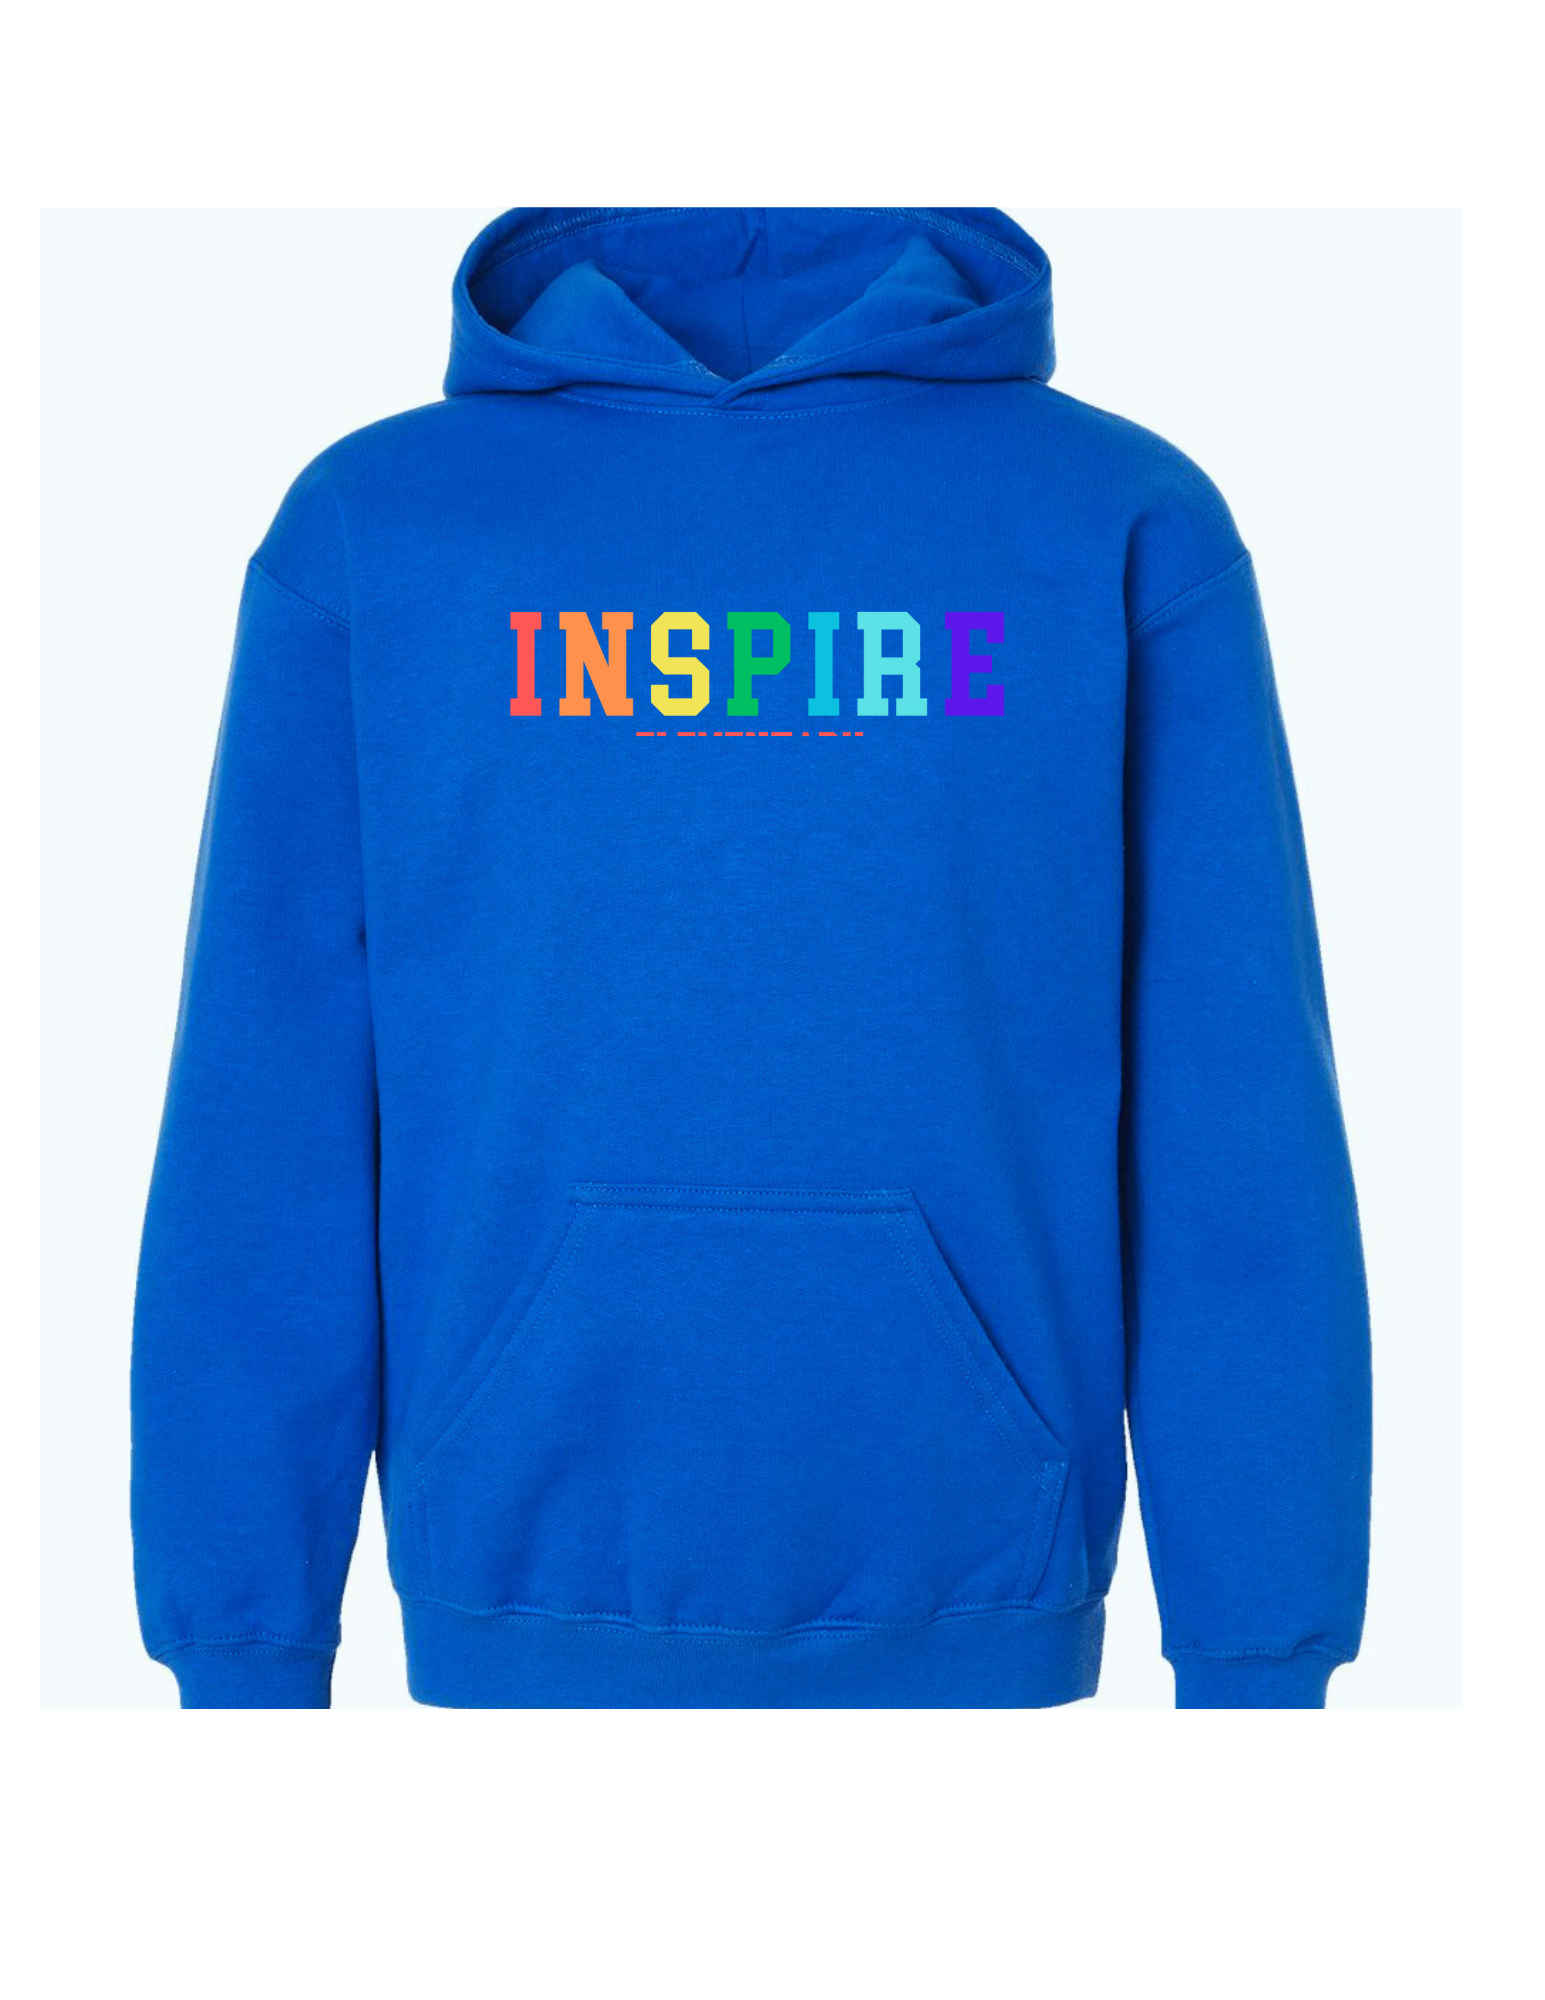 Inspire Colorful Blue Hoodie - ADULT ONLY